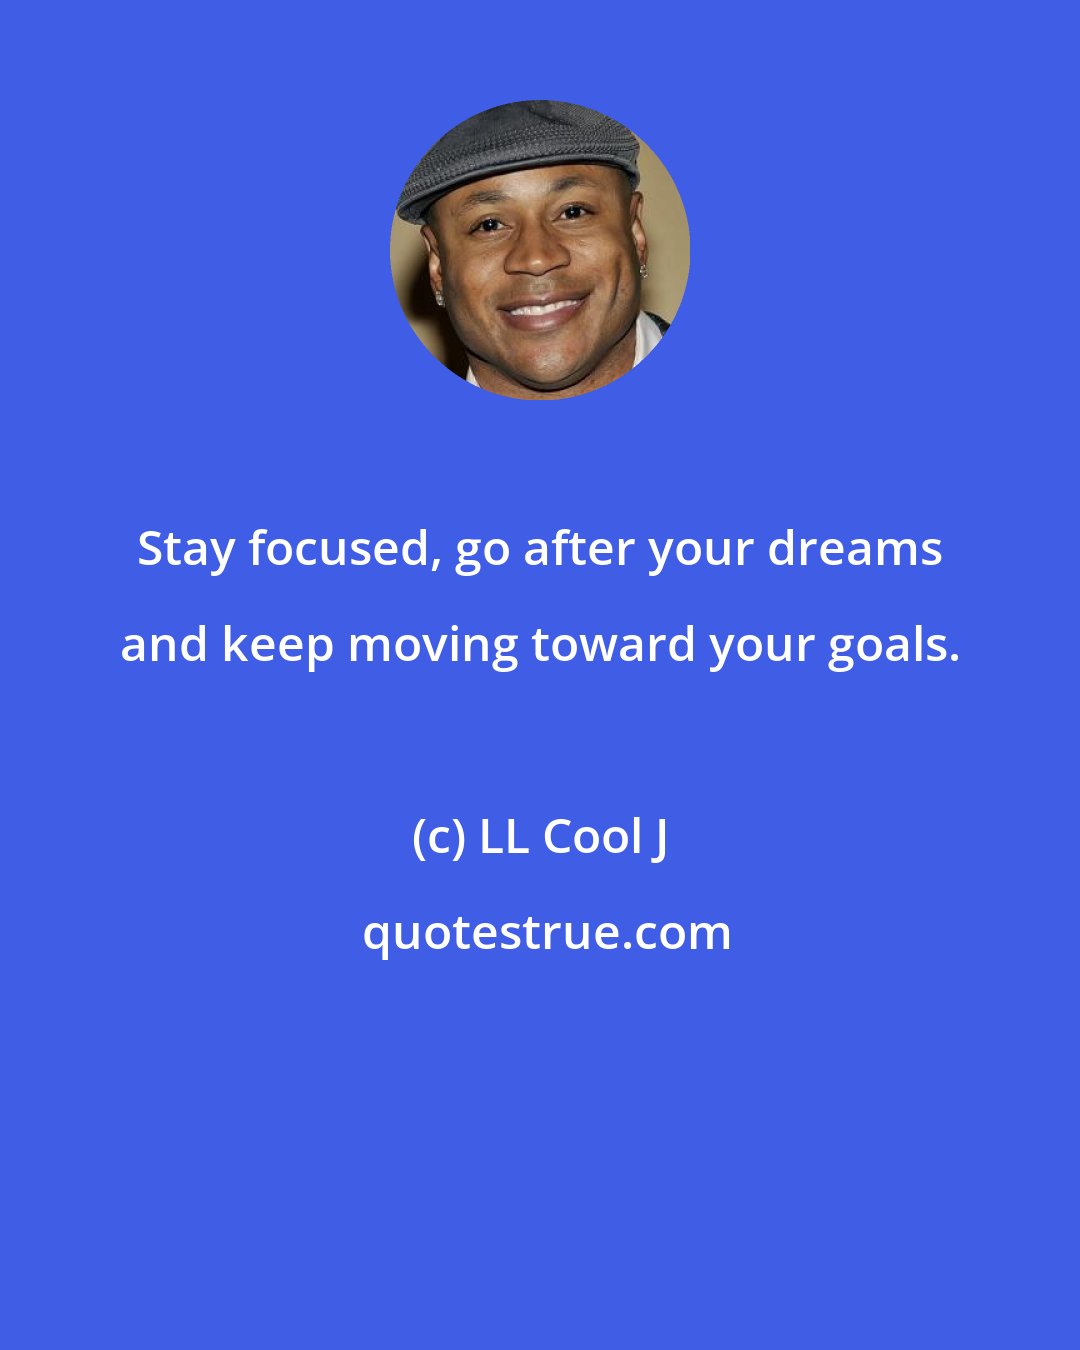 LL Cool J: Stay focused, go after your dreams and keep moving toward your goals.